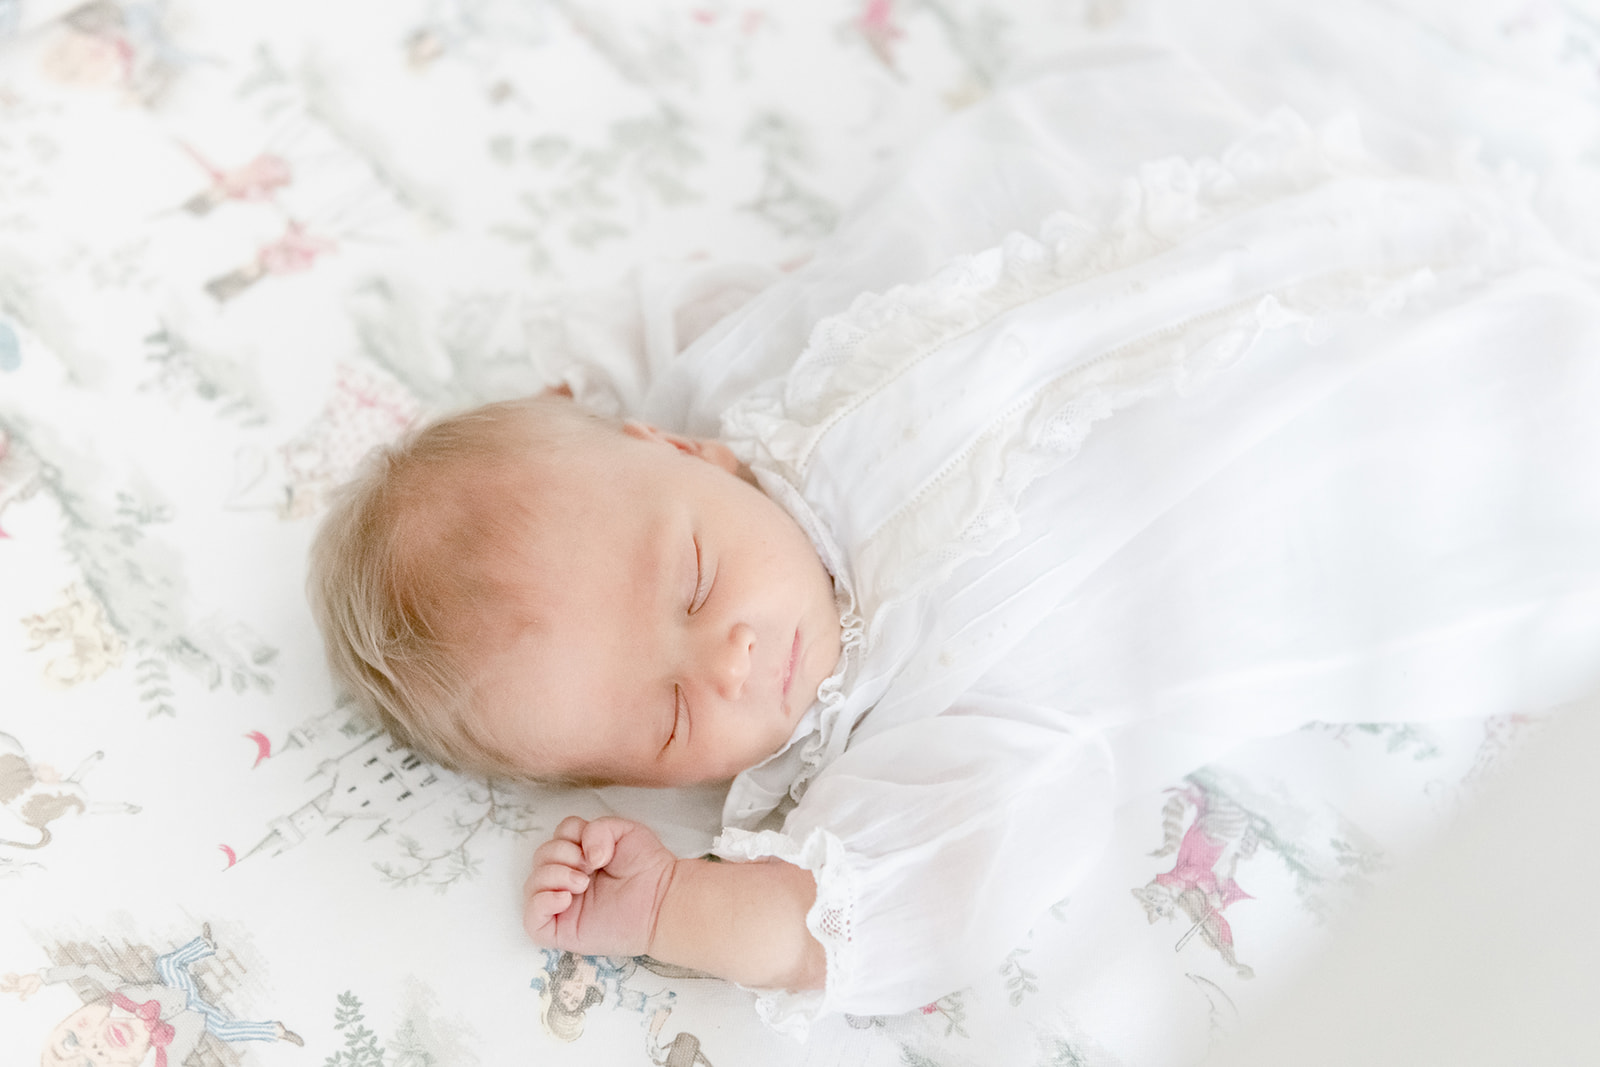 A Nostalgic Newborn Session Filled with Heirlooms